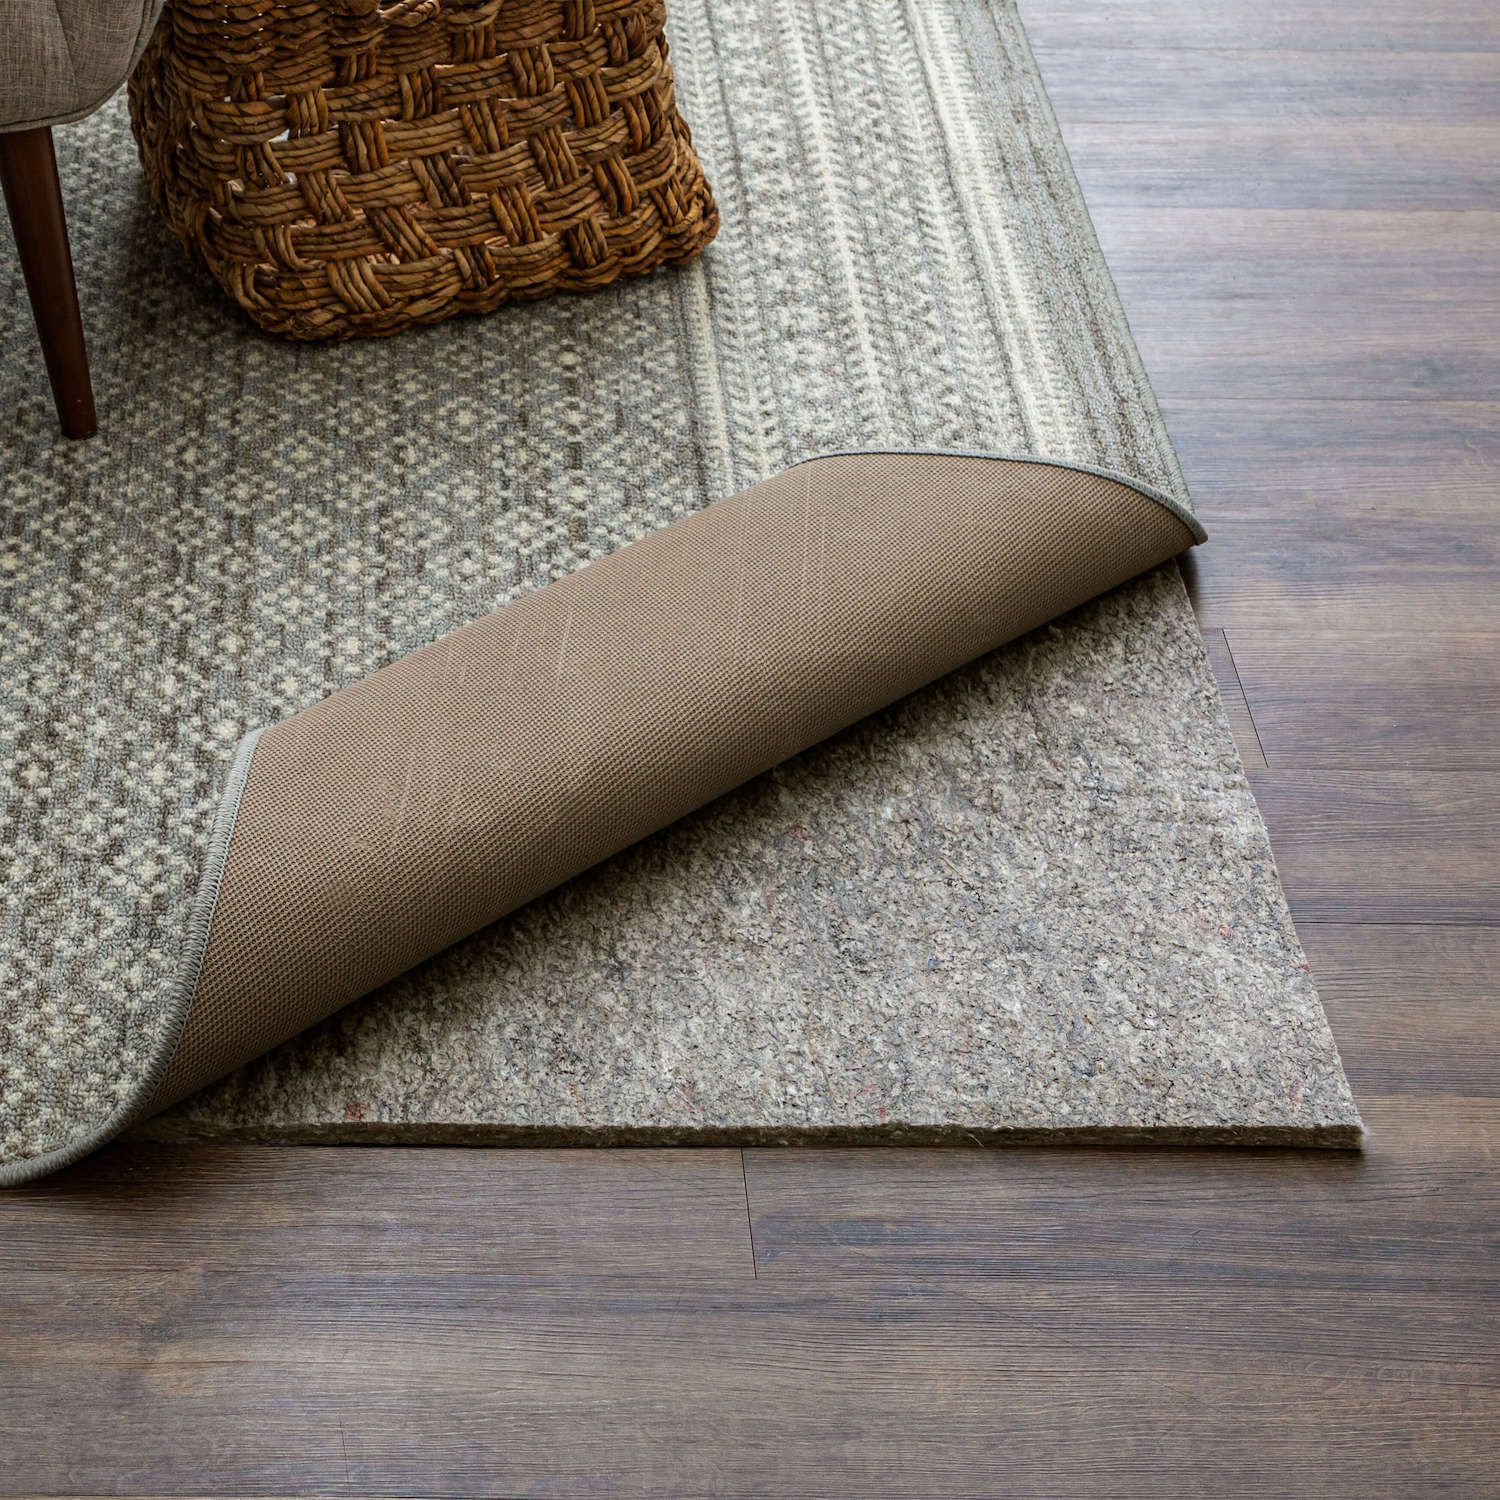 Mohawk Home 8 x 10 1/8 Low Profile Non Slip Rug Pad Felt + Rubber Gripper,  Great For High Traffic Areas -Safe For All Floors